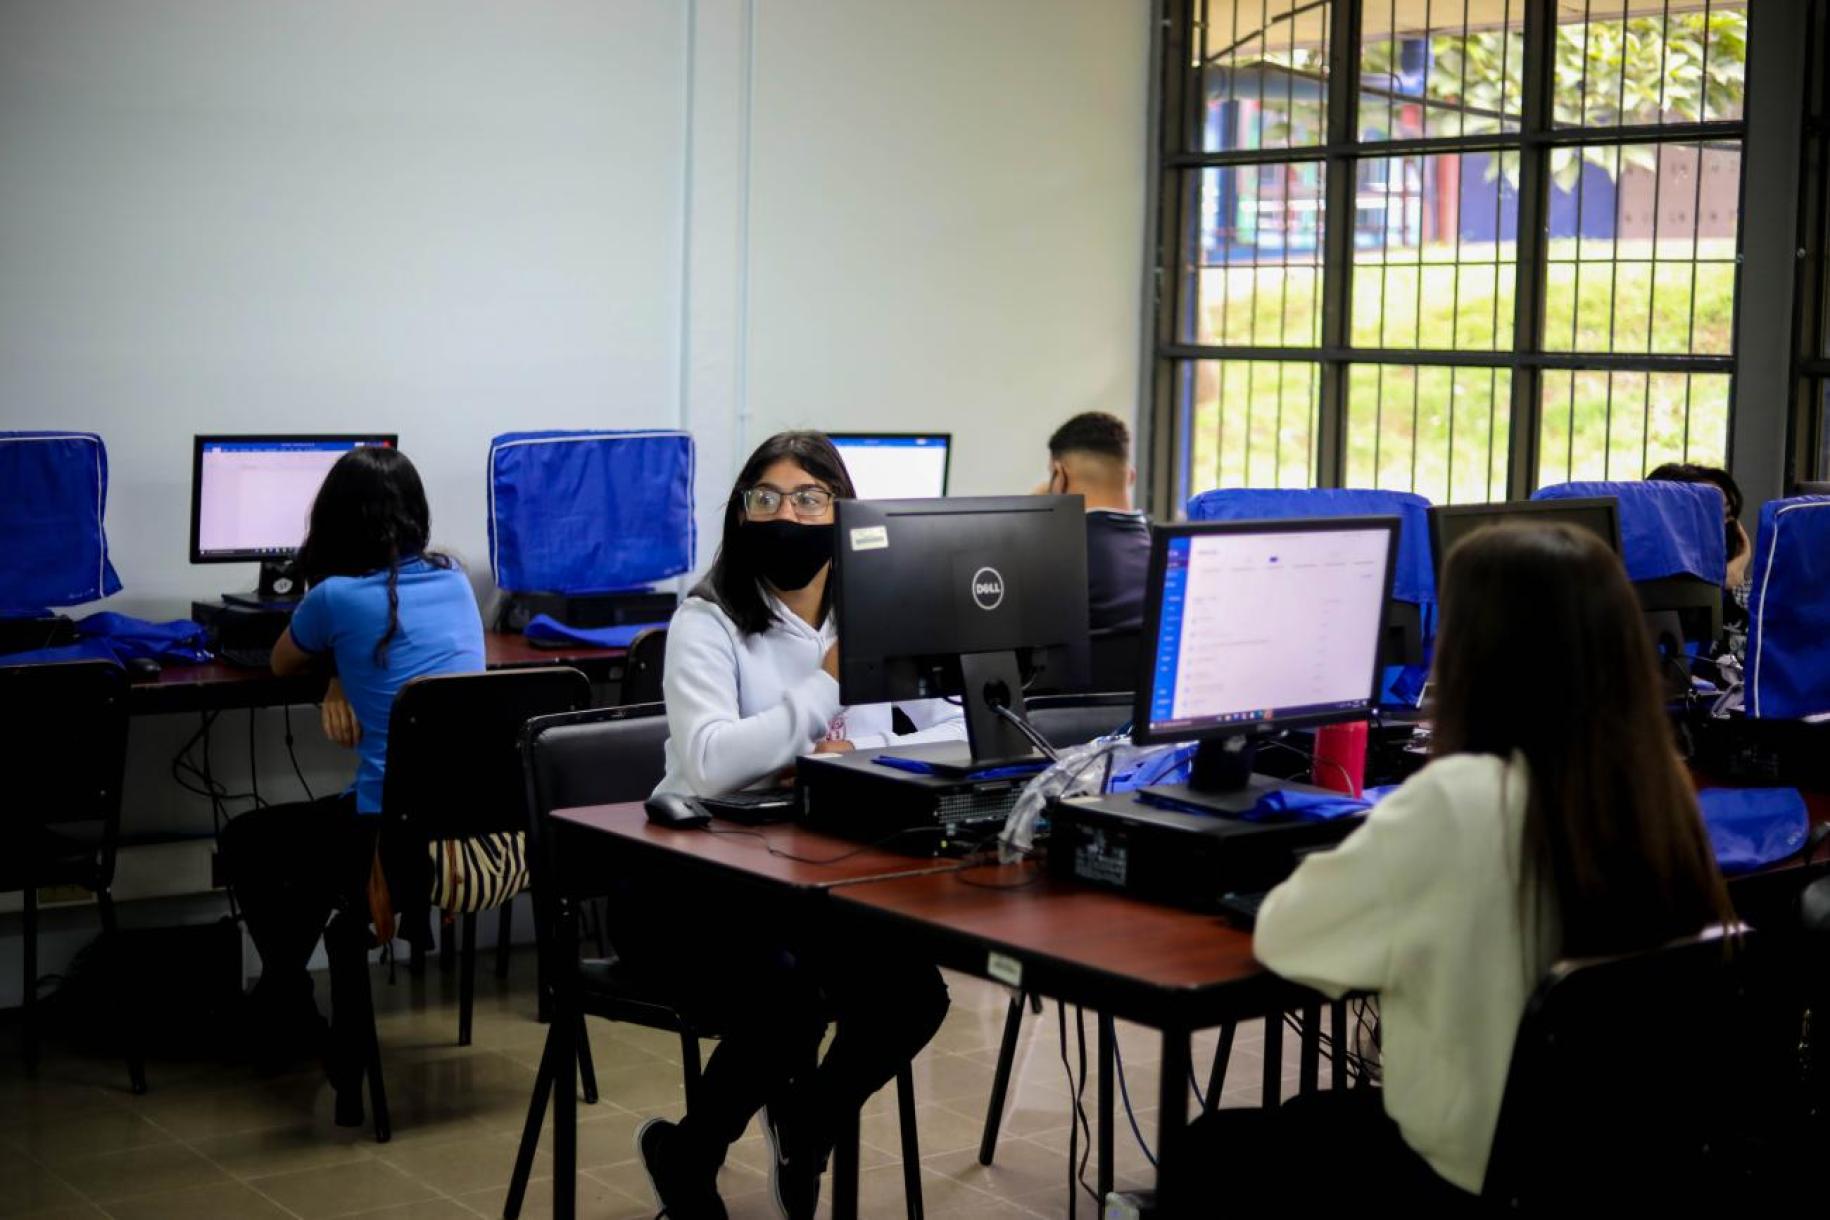 A group of students sitting in front of computer screens in a classroom.